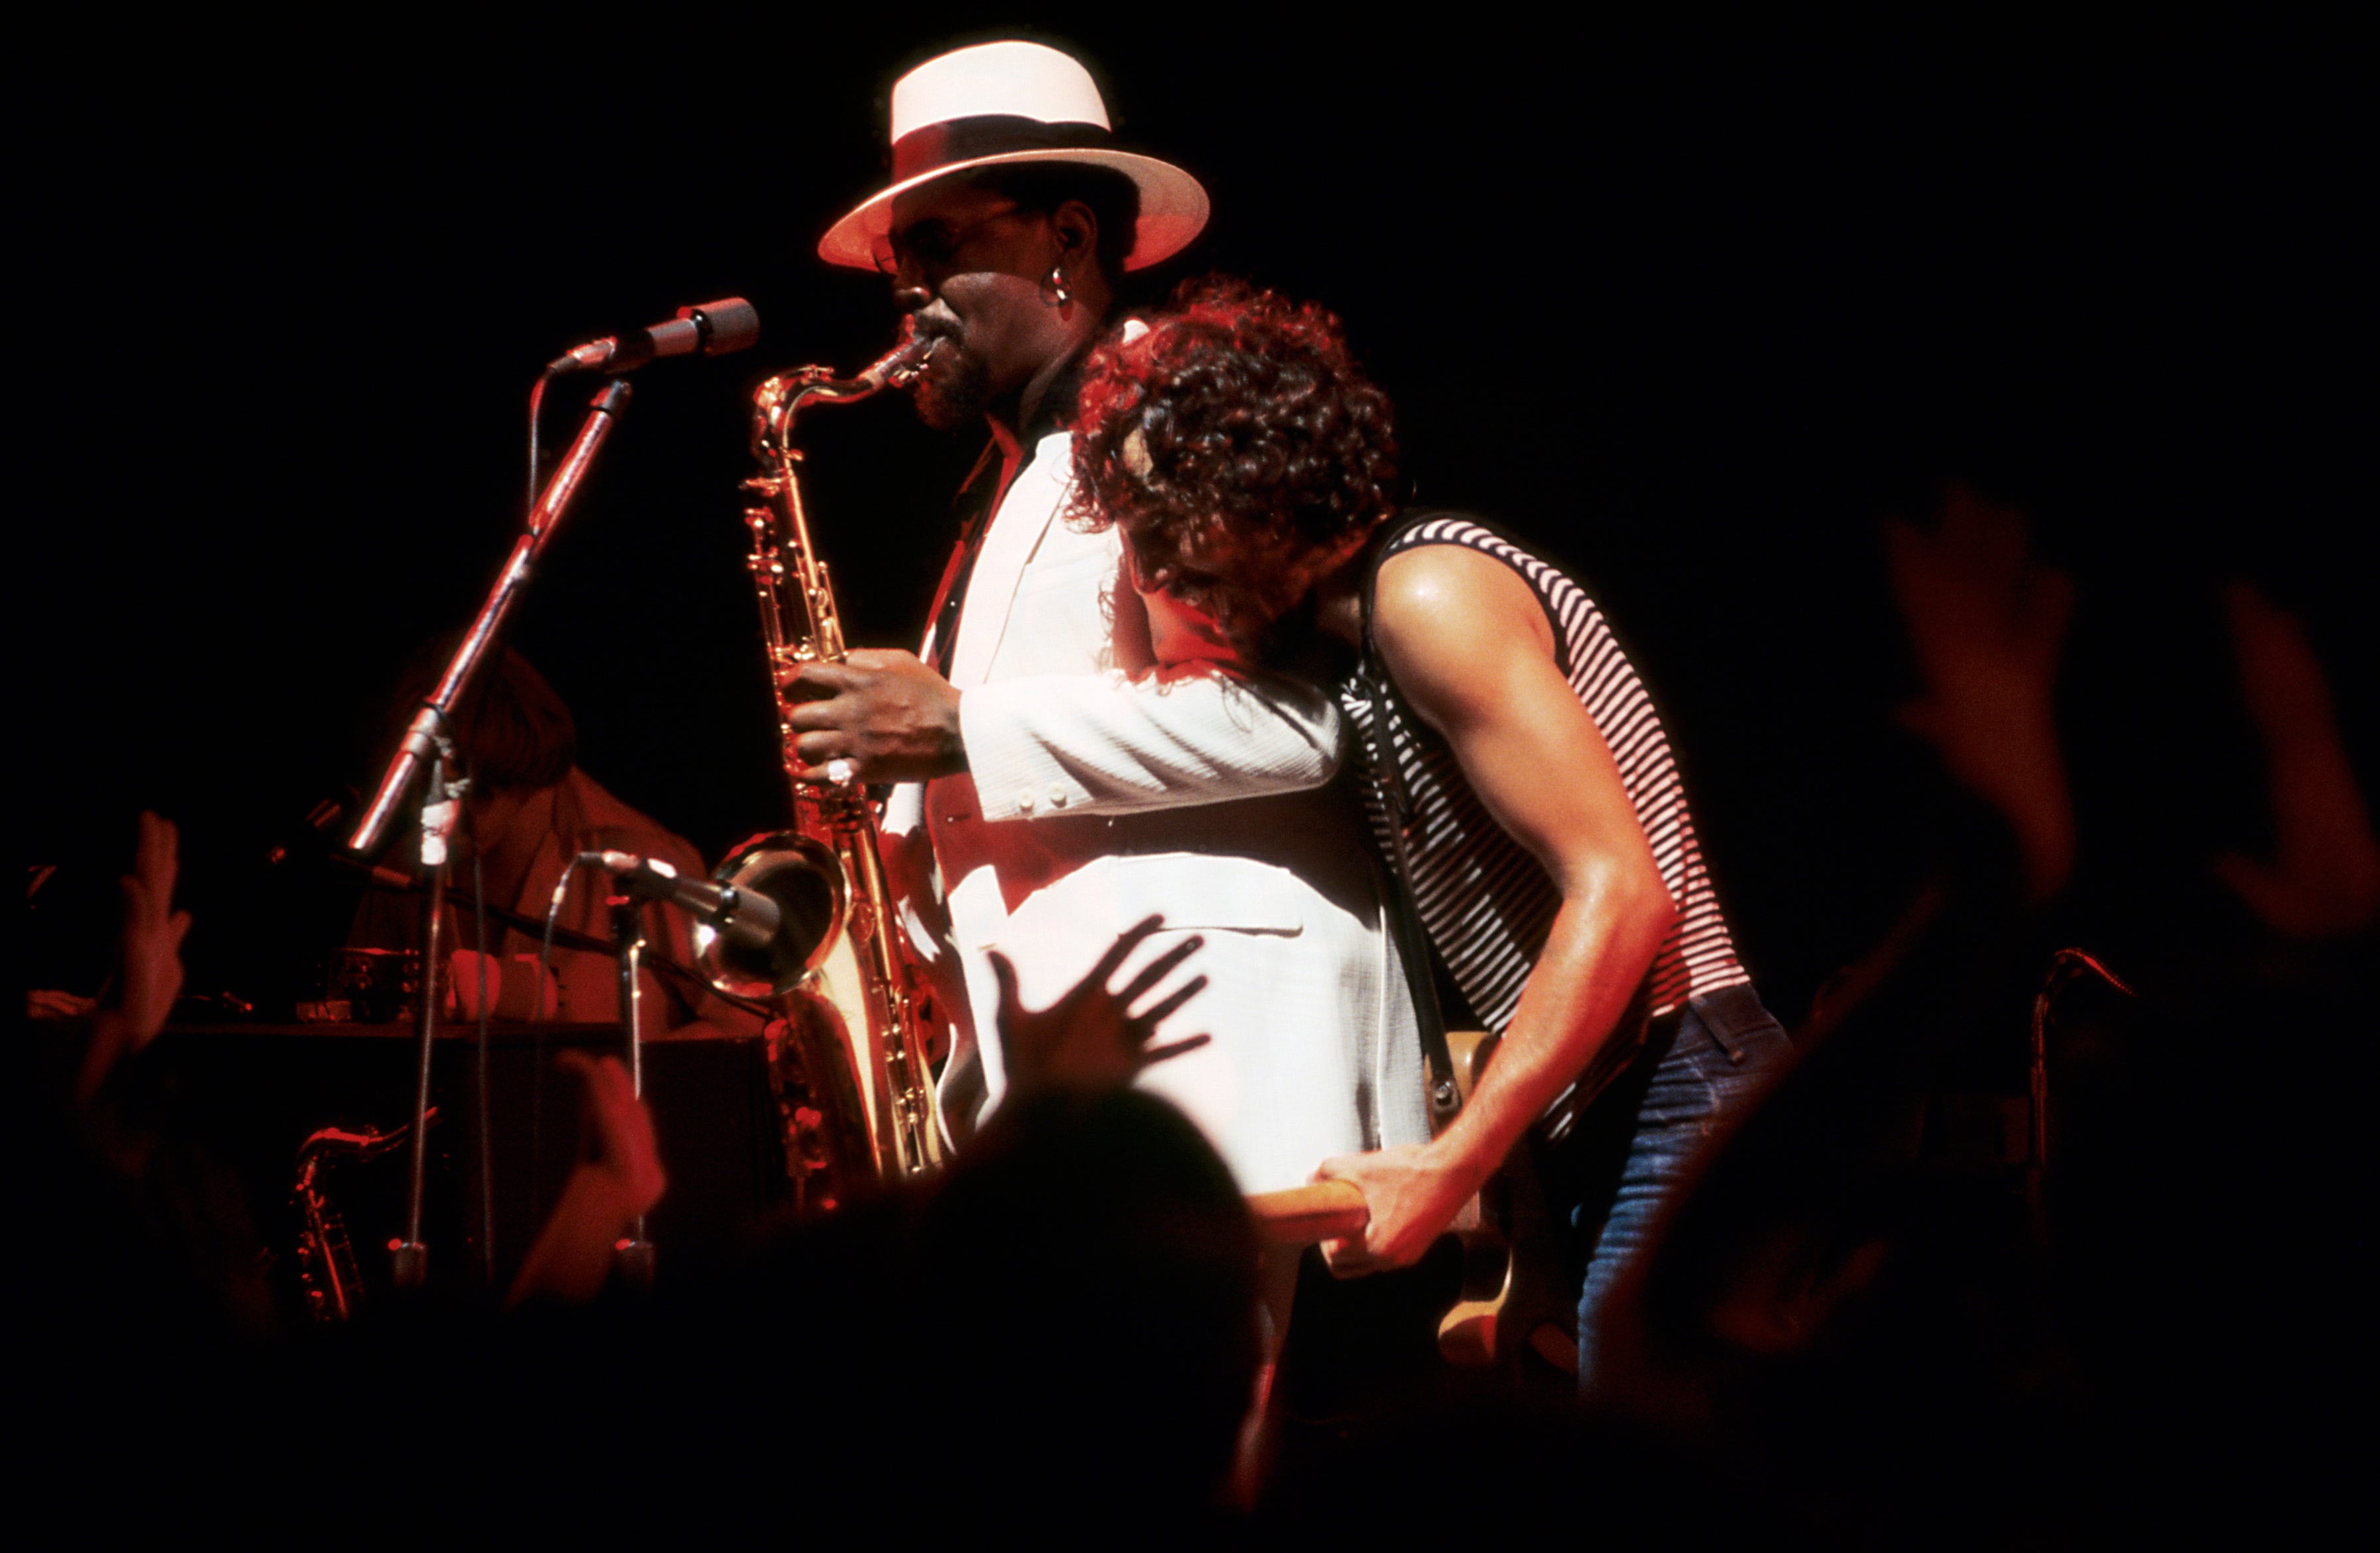 Clarence Clemons and Bruce Springsteen perform with The E-Street Band at Alex Cooley's Electric Ballroom on Aug. 22, 1975, in Atlanta. (Photo by Tom Hill/WireImage/Getty Images)